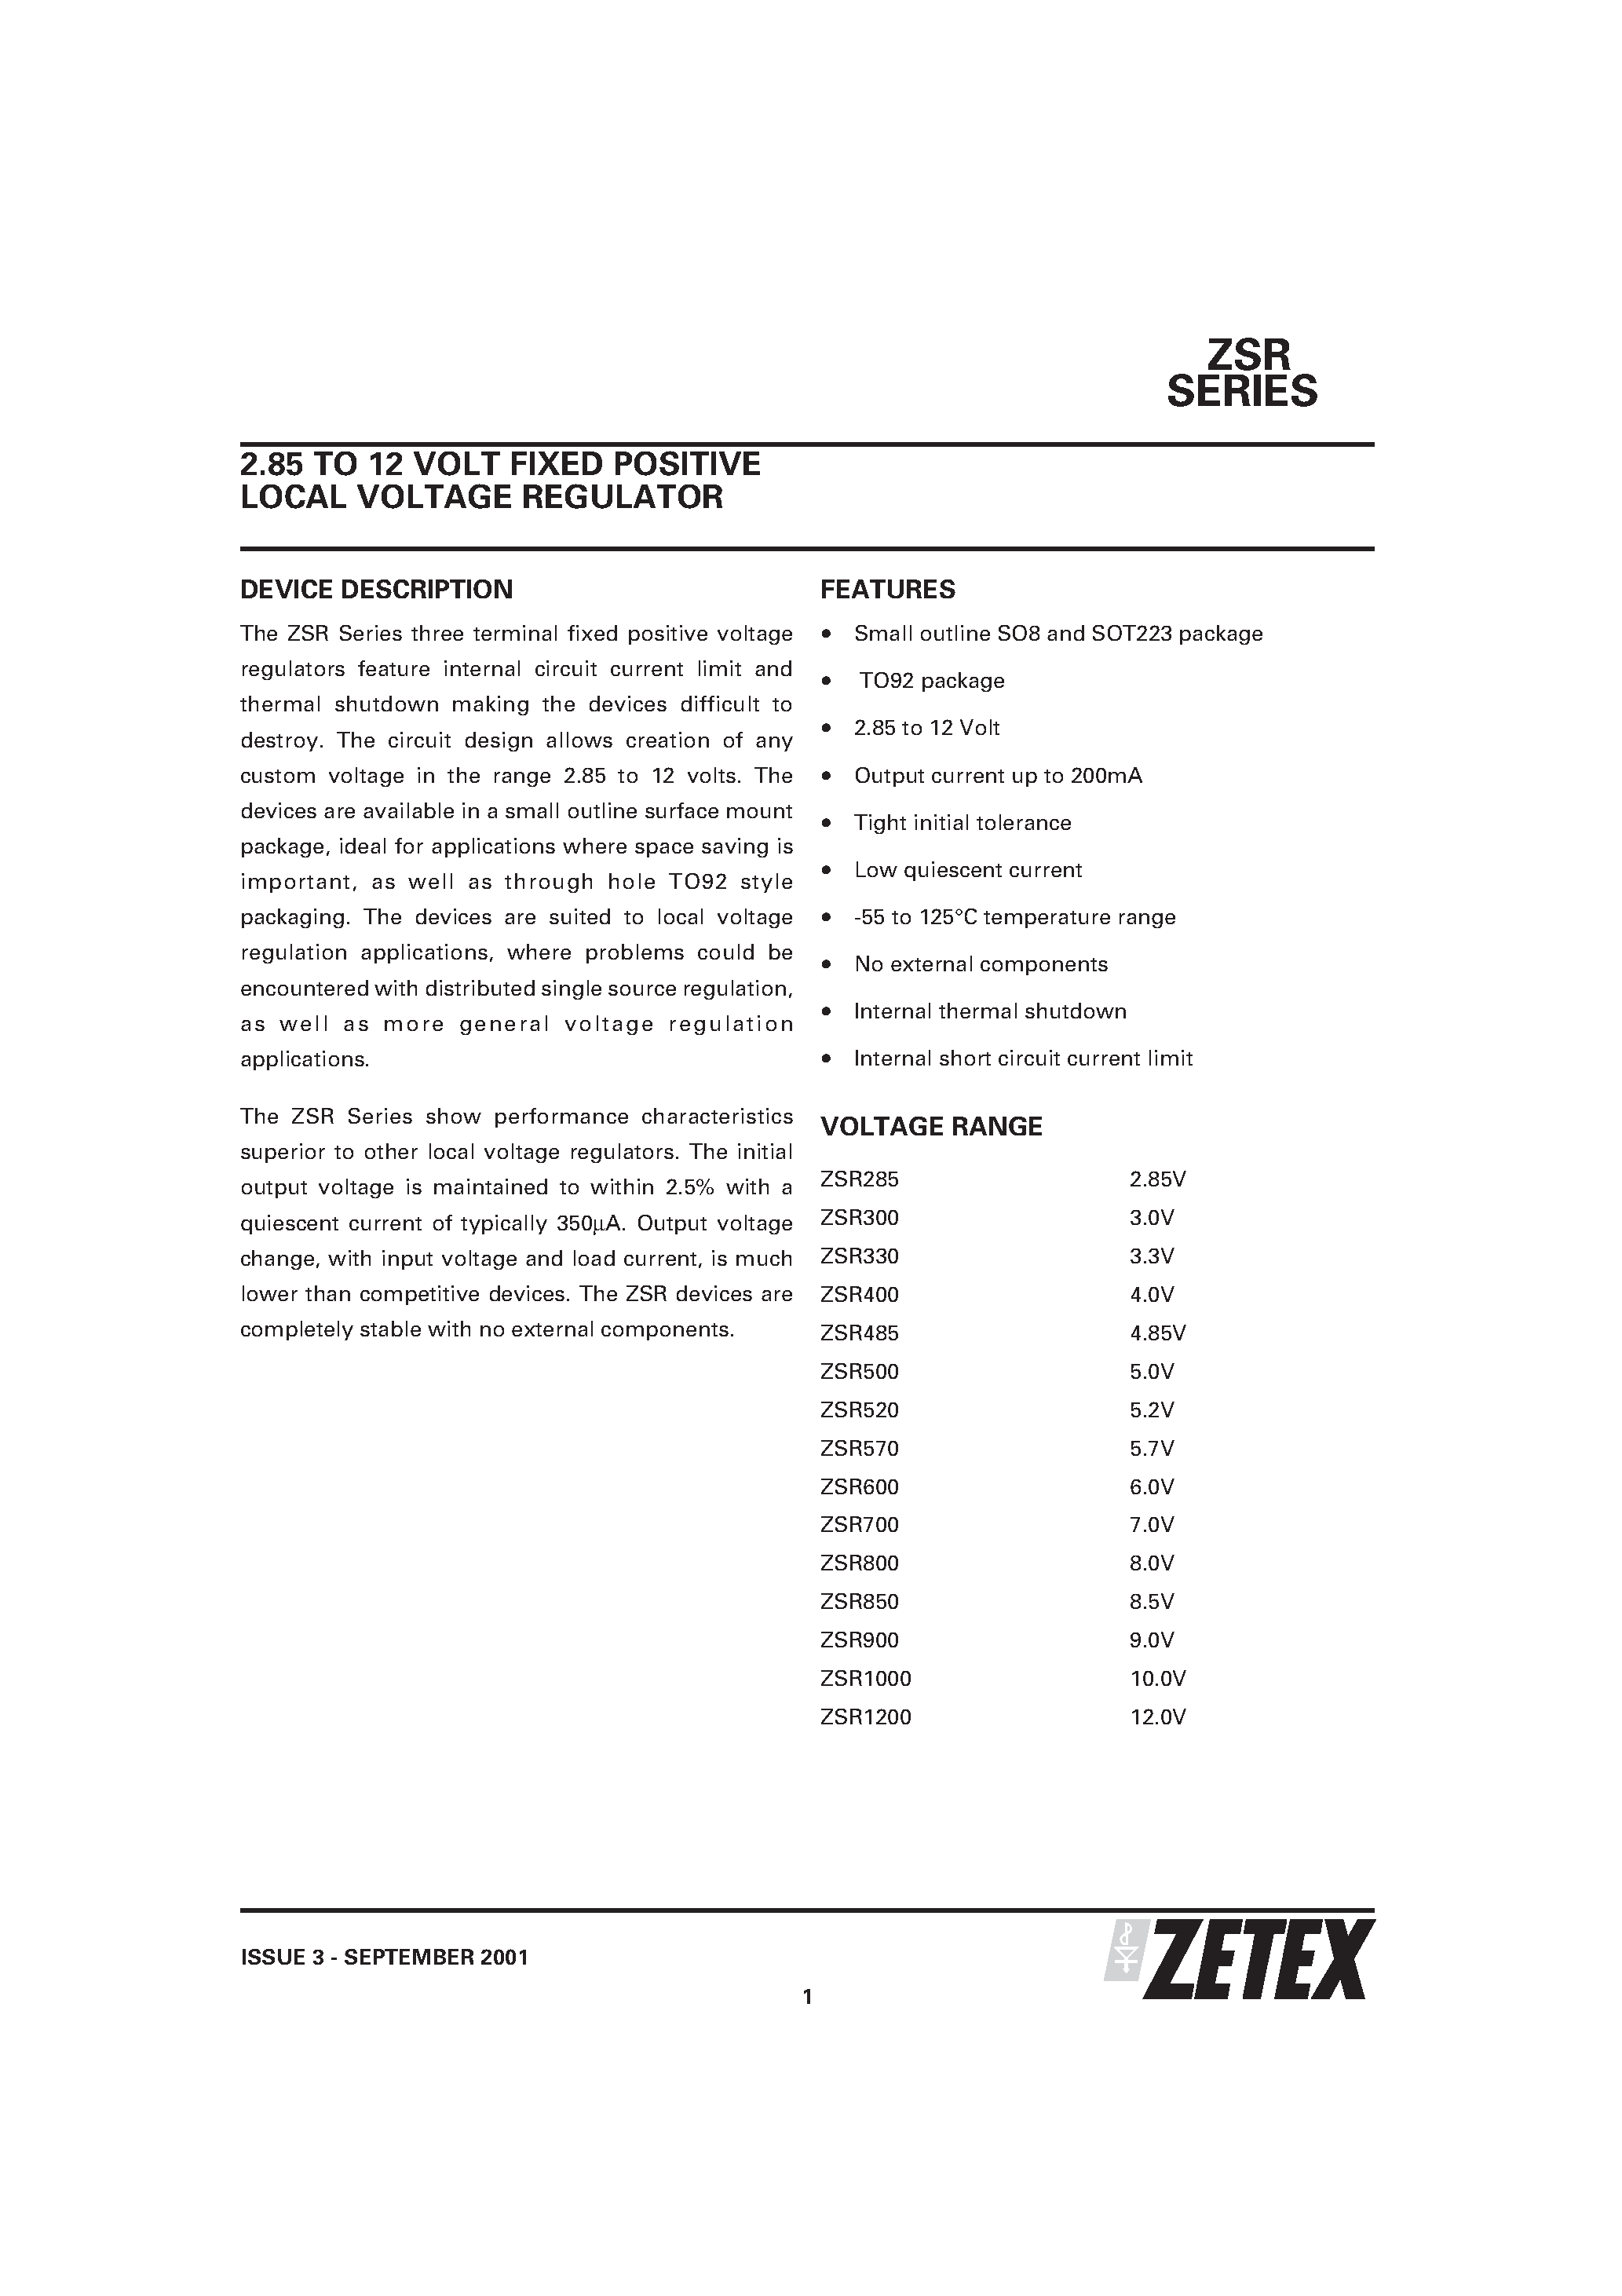 Datasheet ZSR700G - 2.85 TO 12 VOLT FIXED POSITIVE LOCAL VOLTAGE REGULATOR page 1